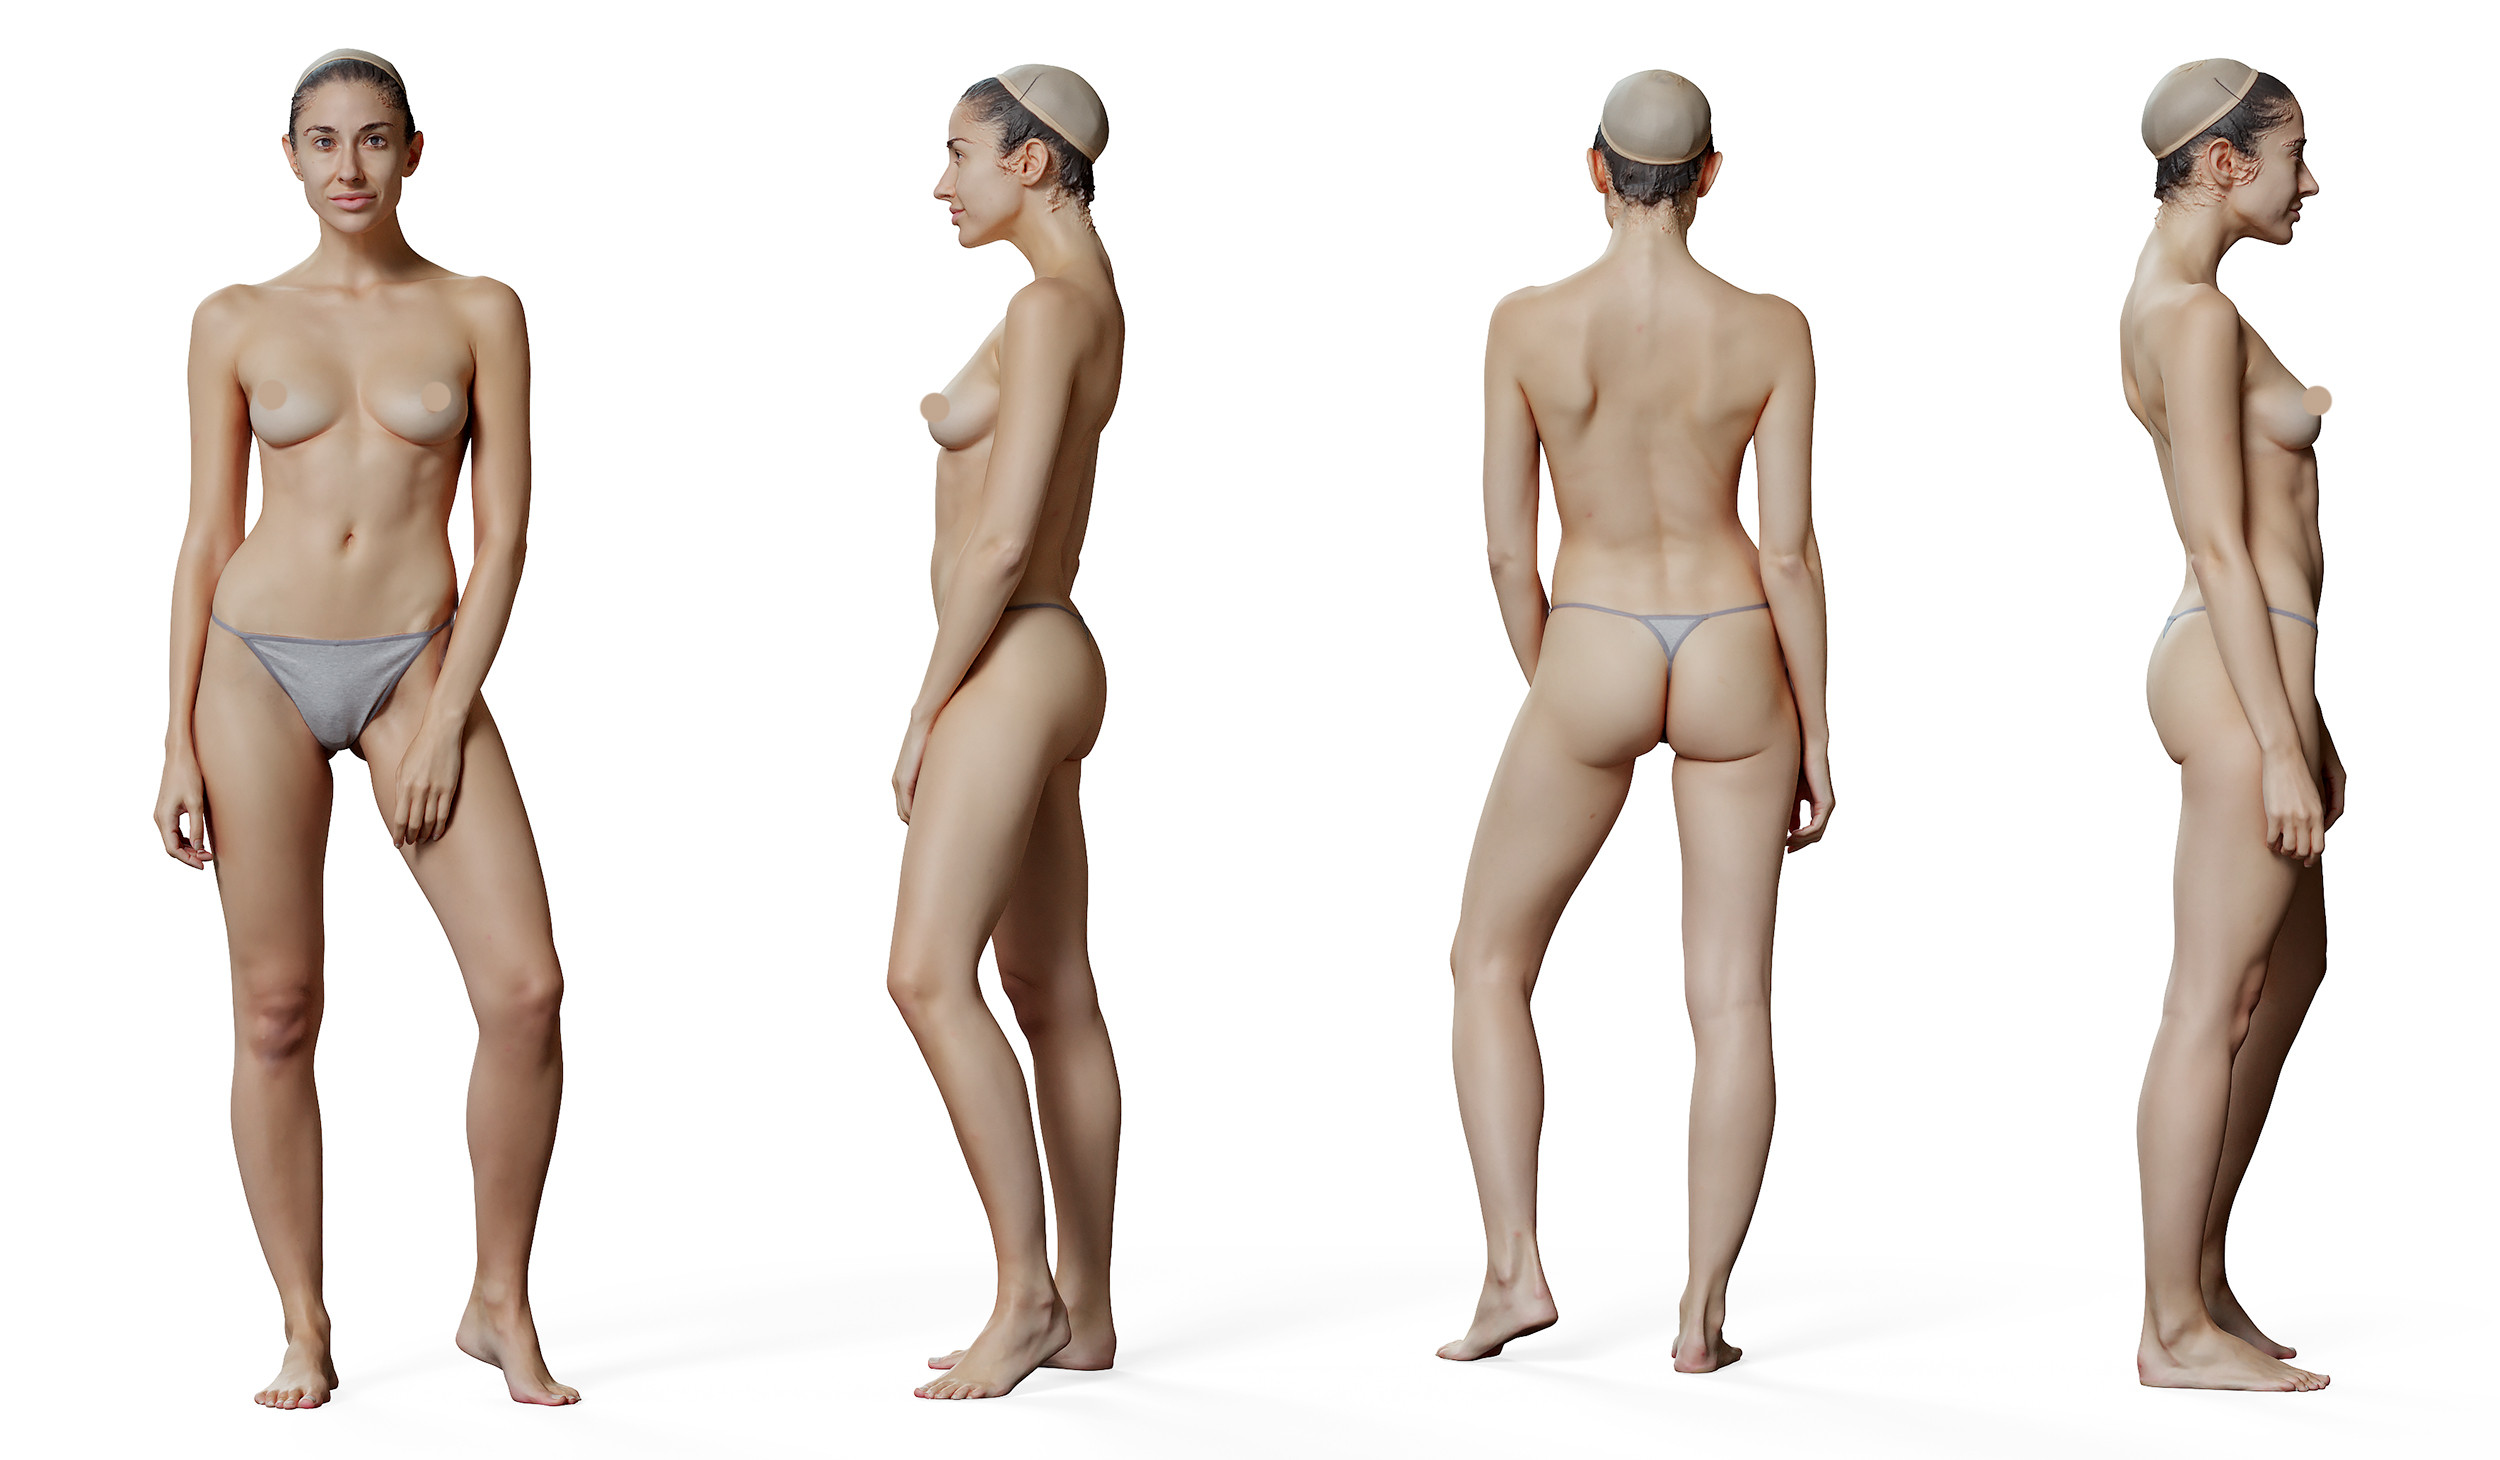 More Female Anatomy Reference Scans.